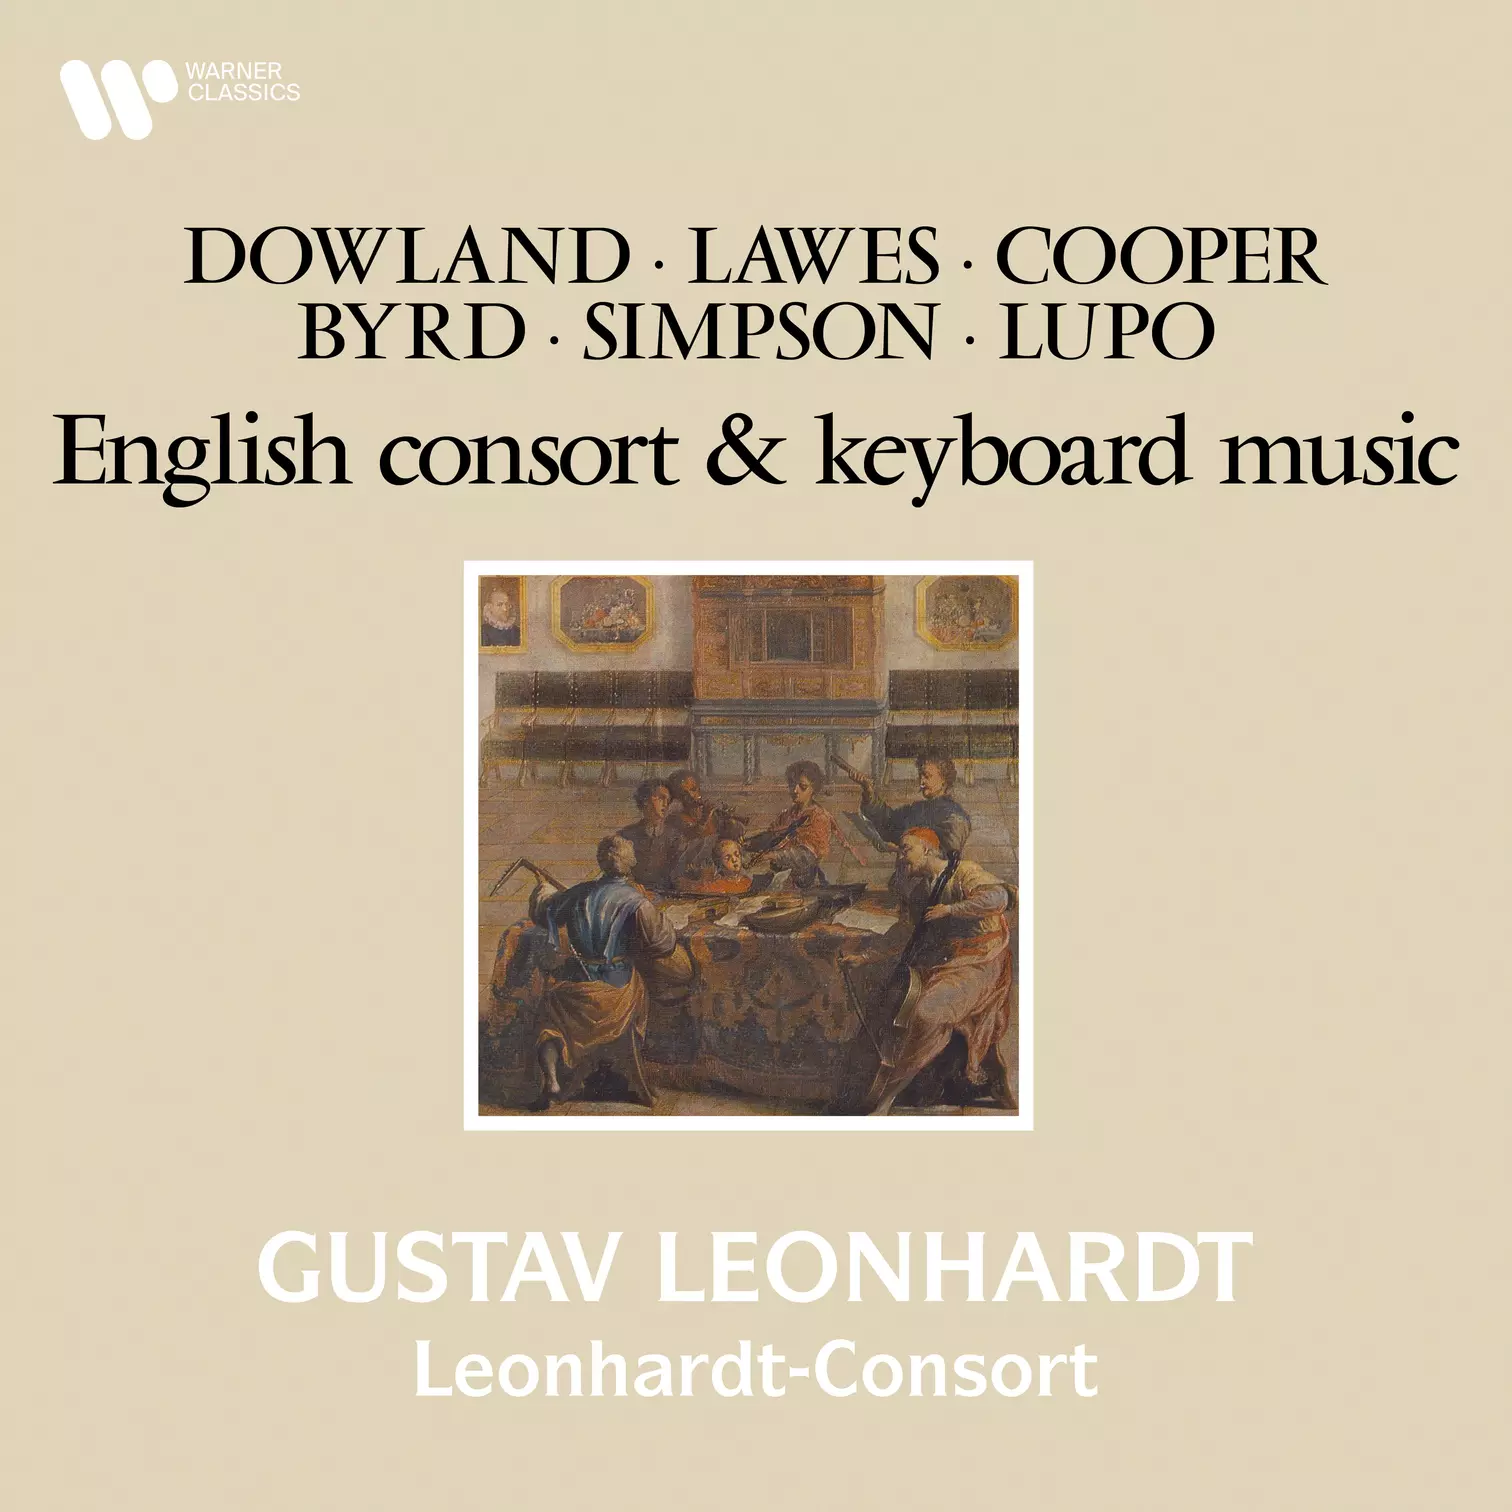 Dowland, Lawes, Cooper, Byrd, Simpson & Lupo: English Consort & Keyboard Music